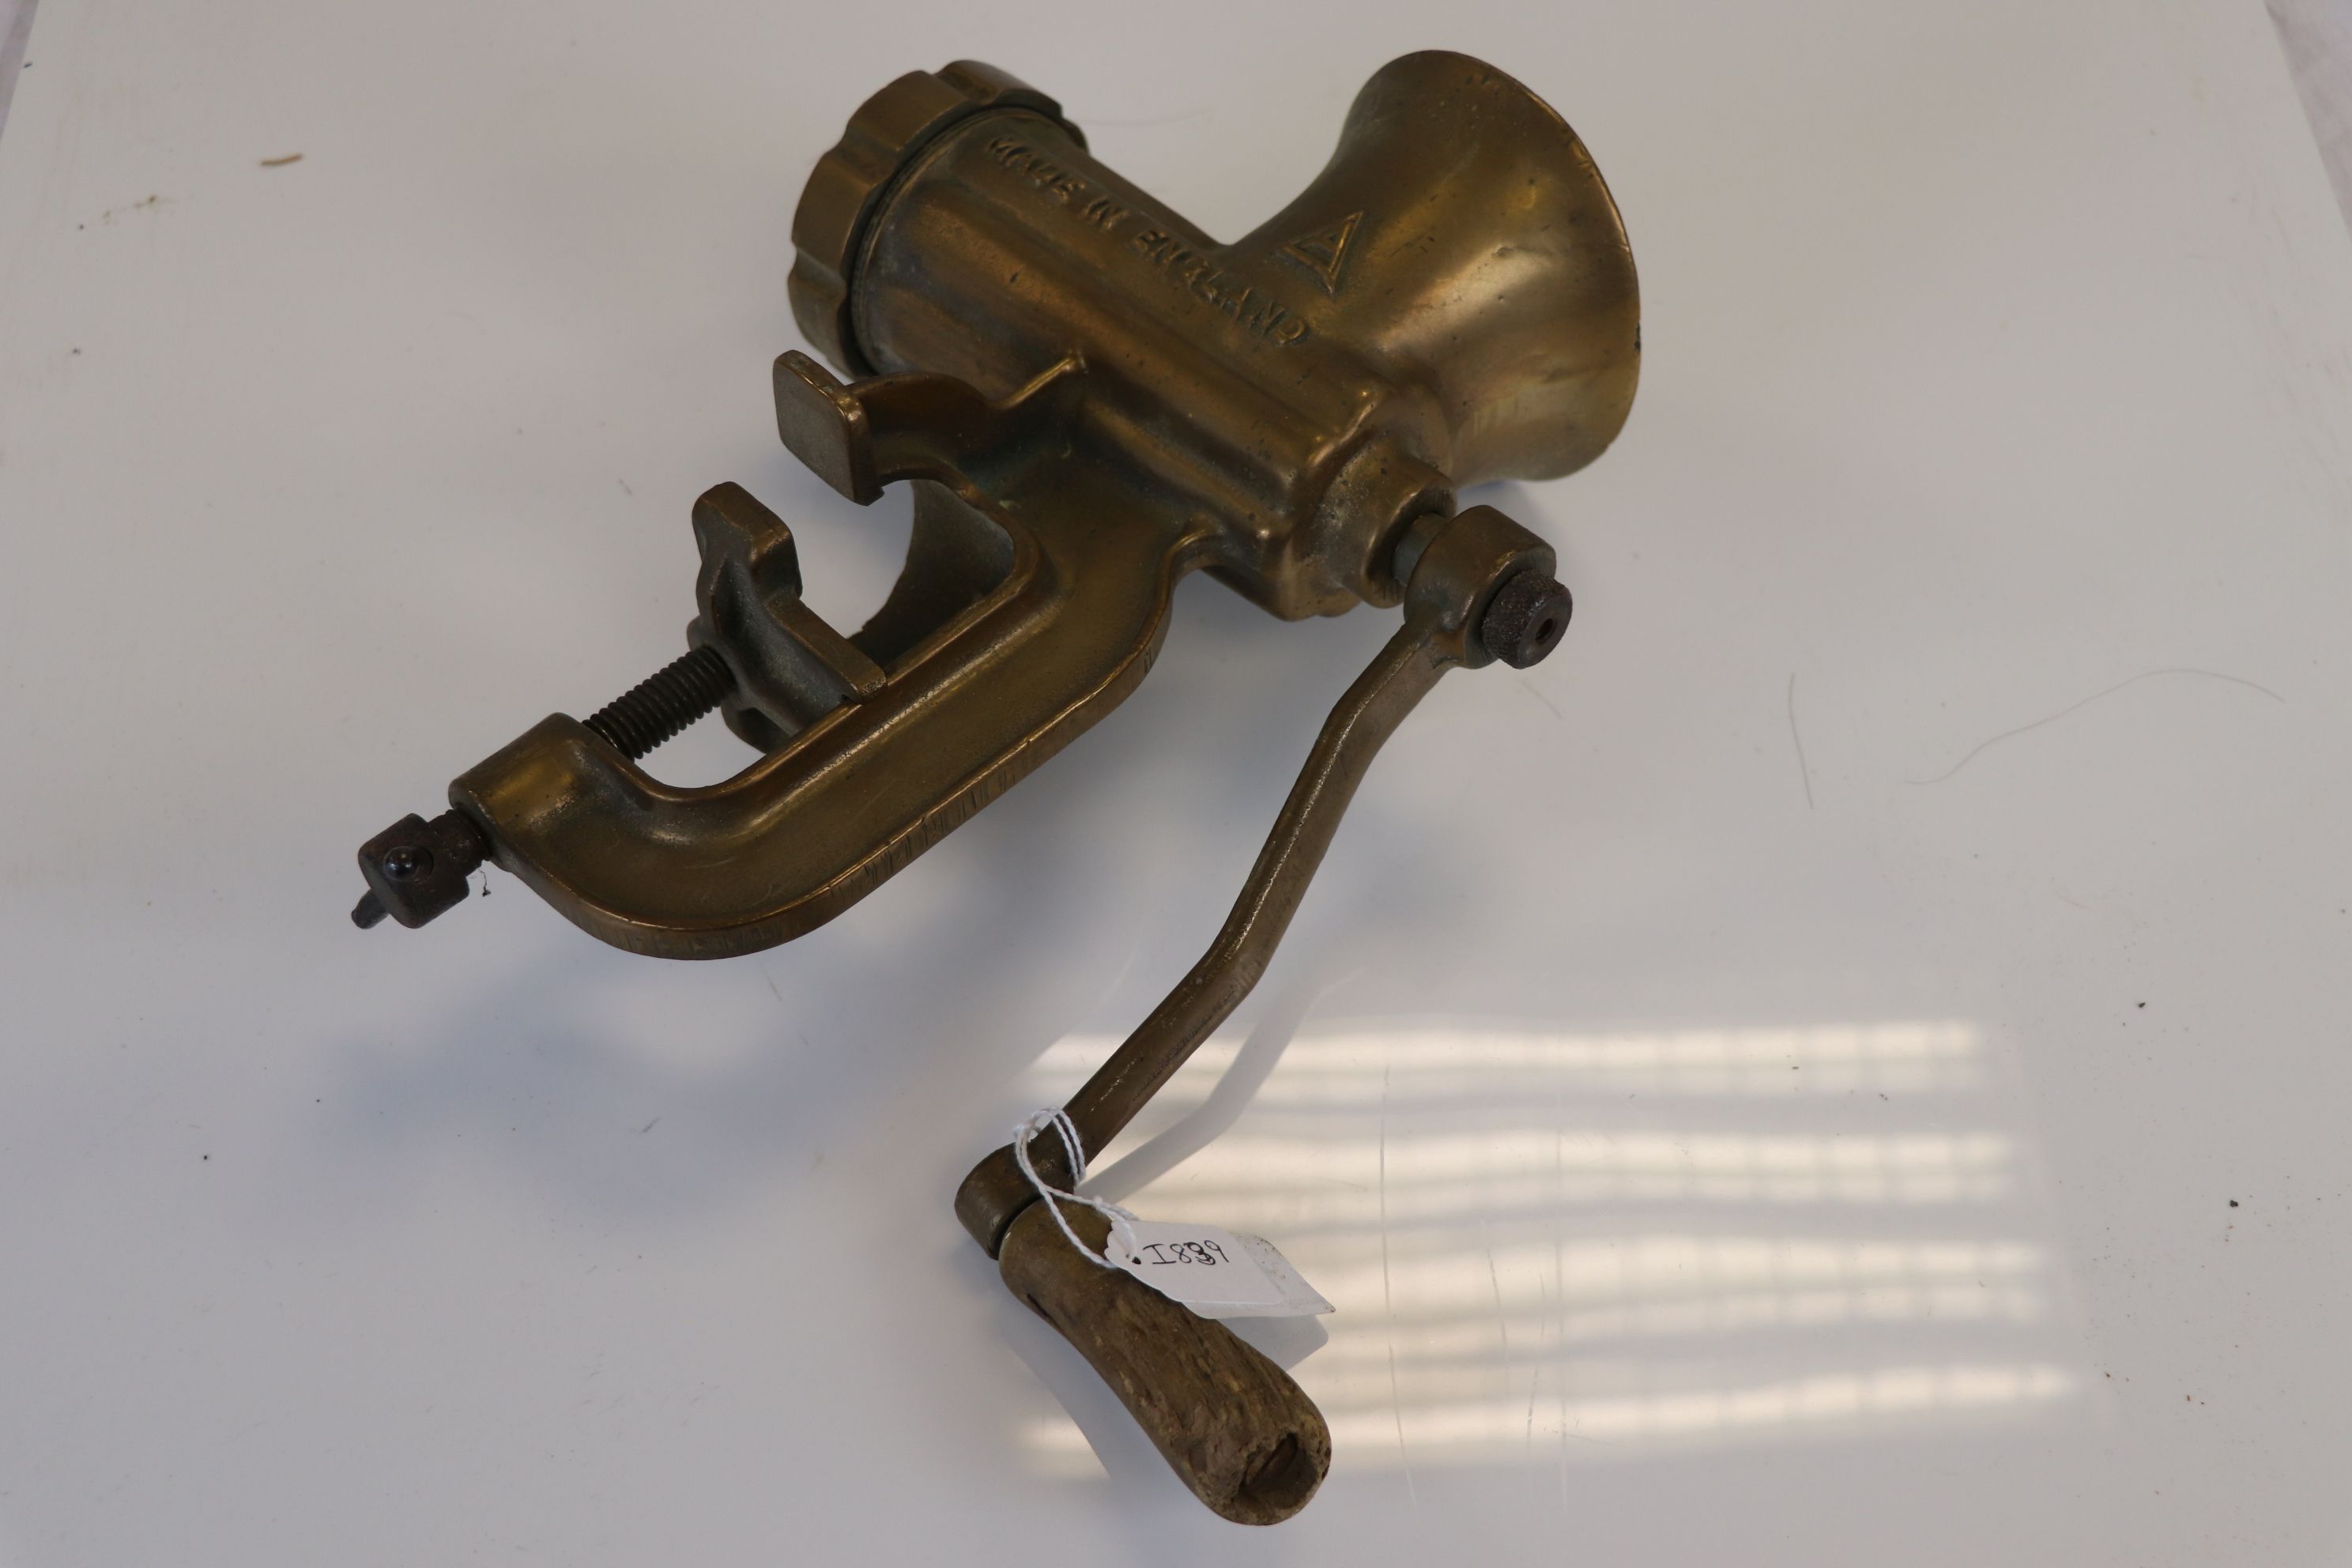 Creasey cast Brass or Bronze Mincer with wooden handle - Image 4 of 5